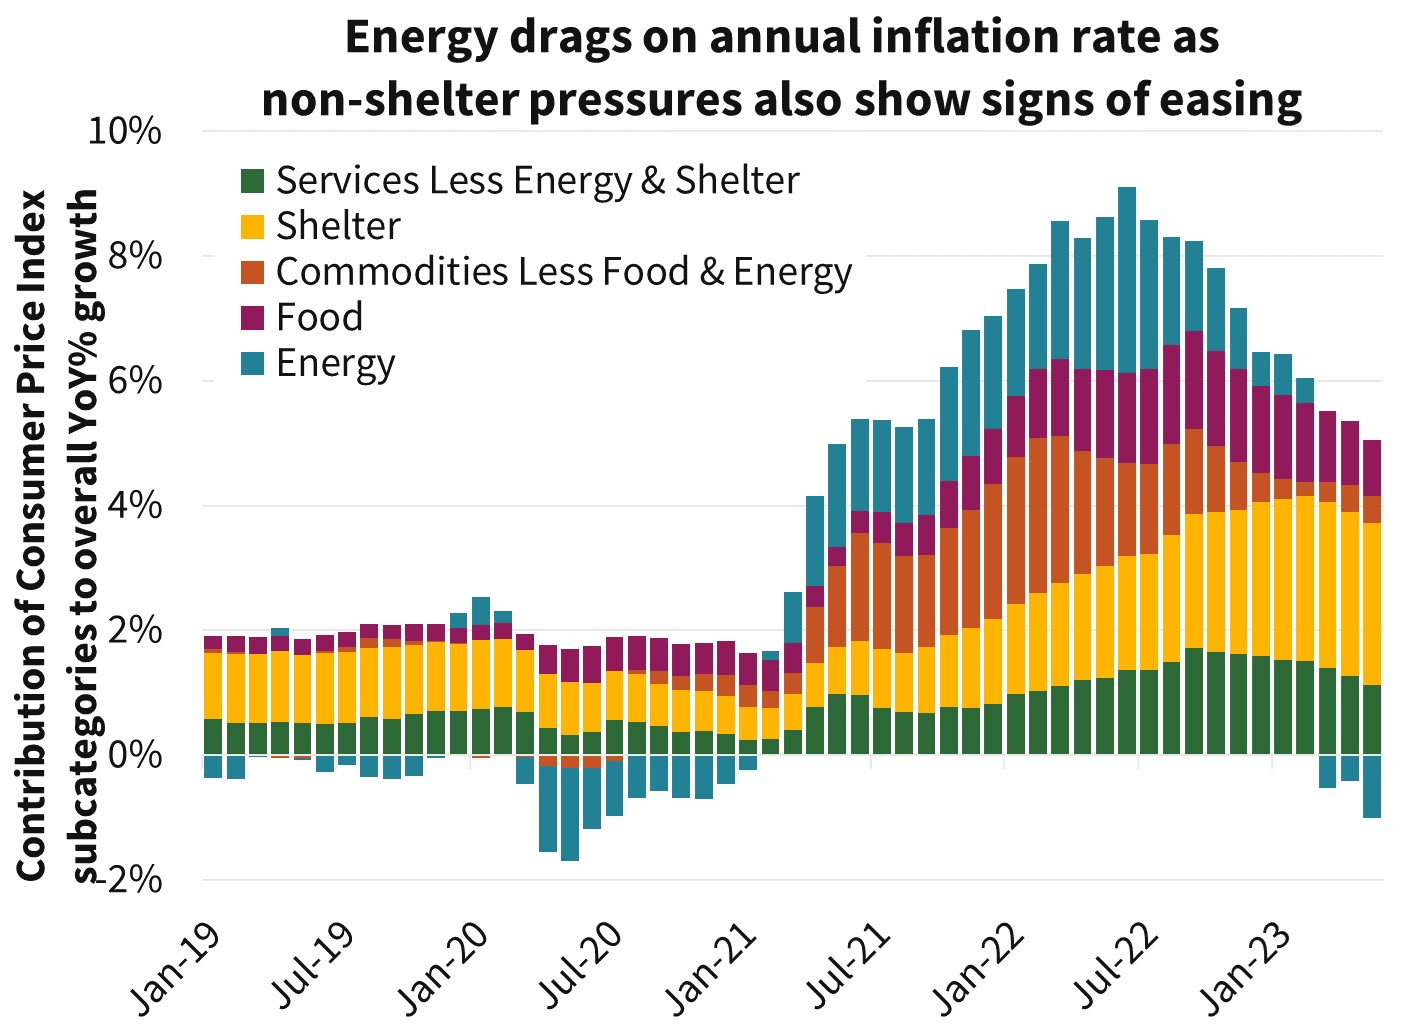  Energy drags on annual inflation rate as non-shelter pressures also show signs of easing 